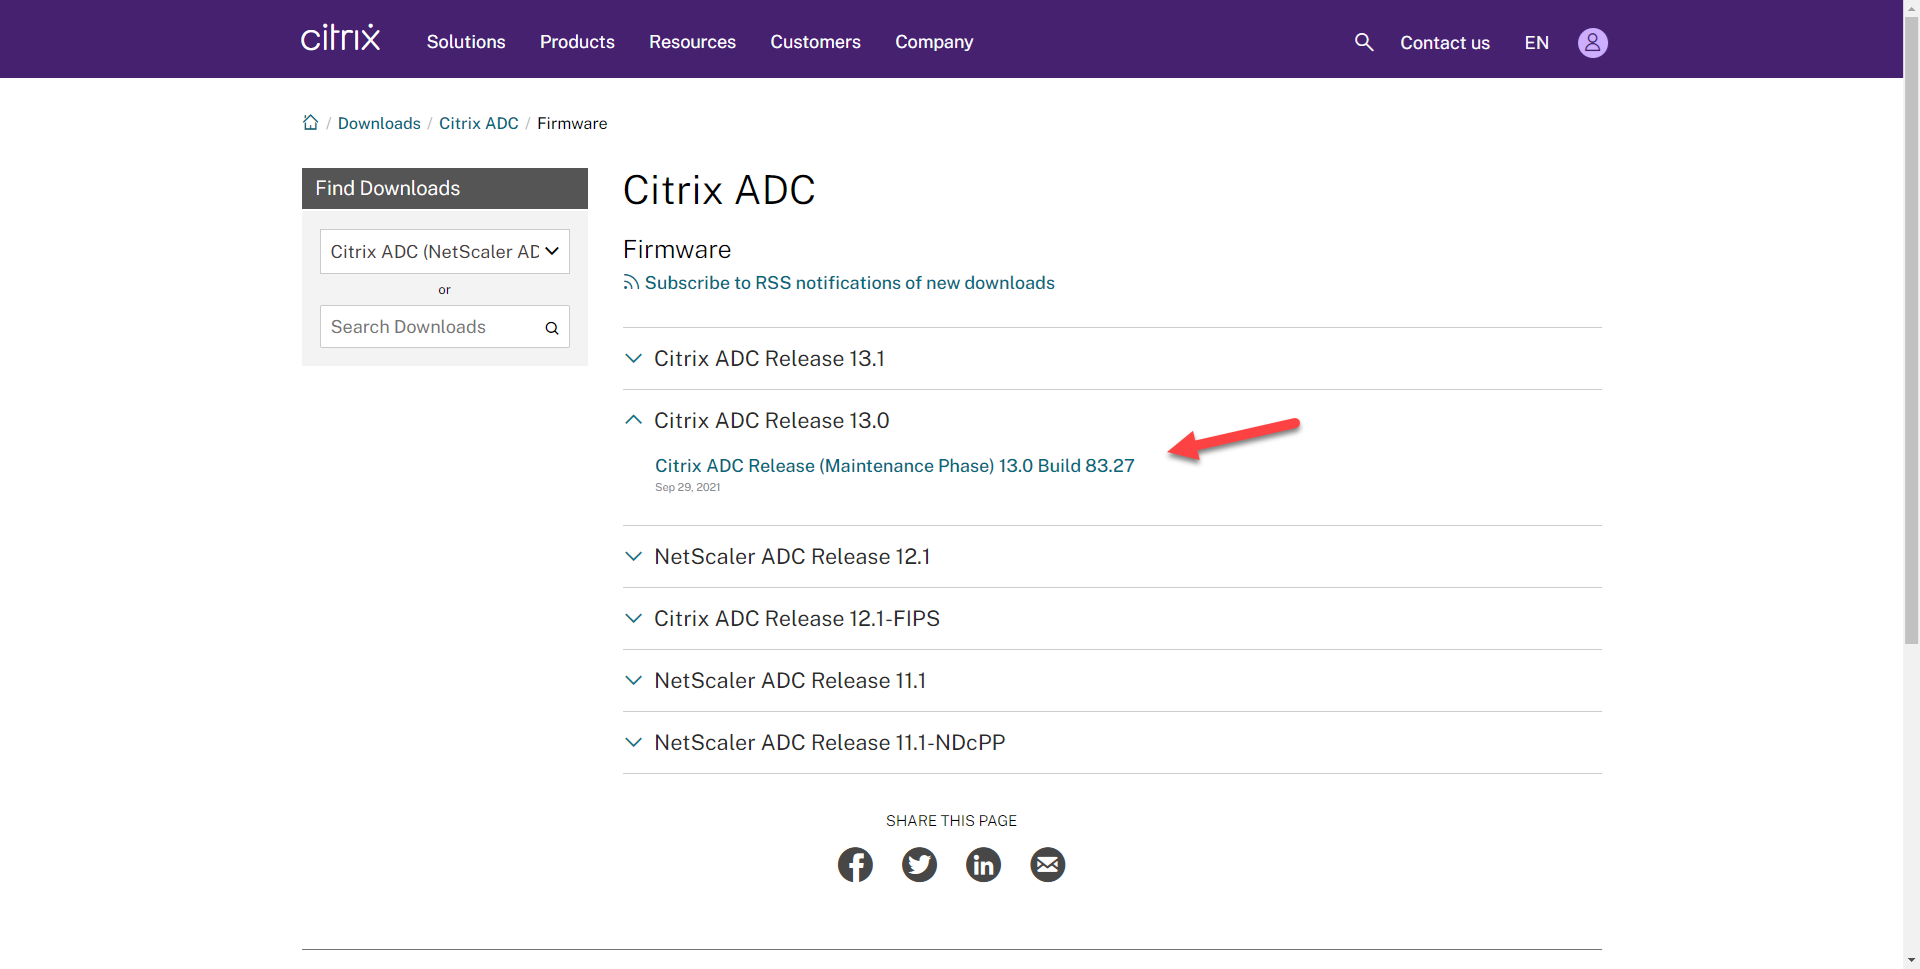 010122 2037 Howtoupgrad5 - How to upgrade Citrix ADC to 13.0